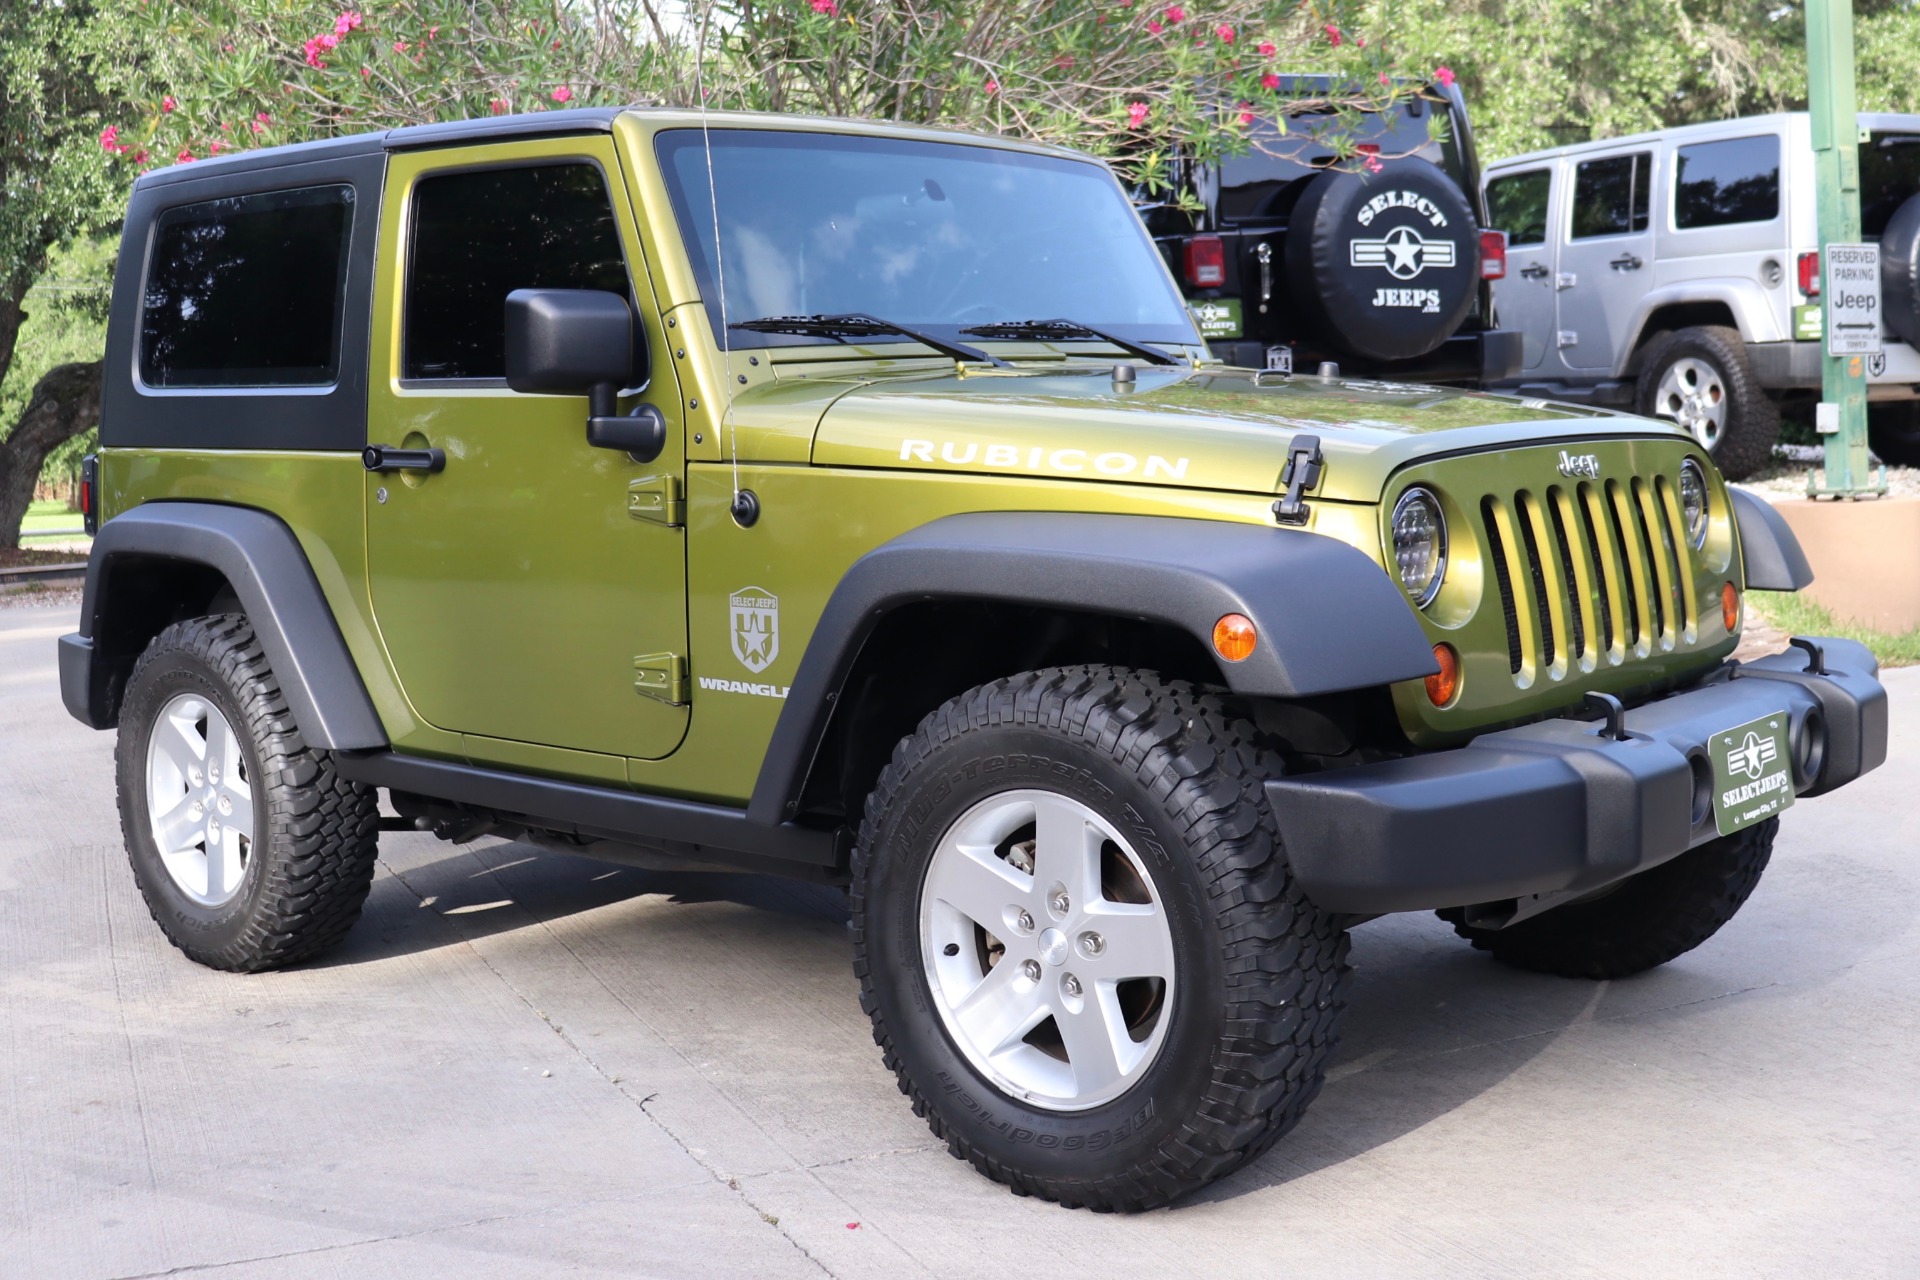 Used-2007-Jeep-Wrangler-Rubicon-4WD-2dr-Rubicon For Sale Select Jeeps Inc. 